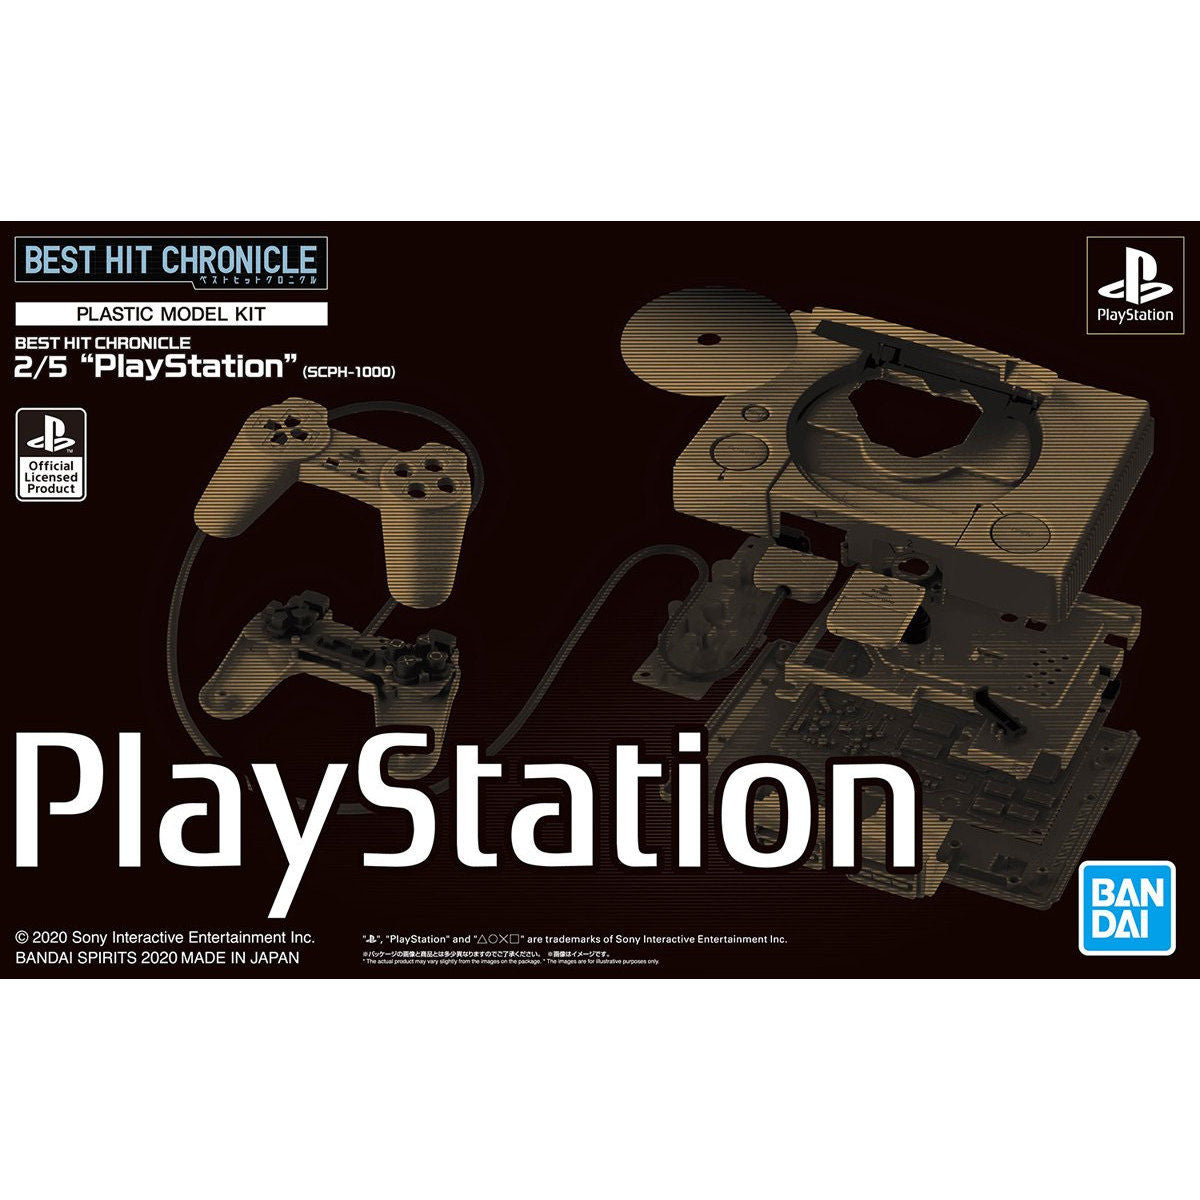 Best Hit Chronicle 2/5 'Play Station' (SCPH-1000)